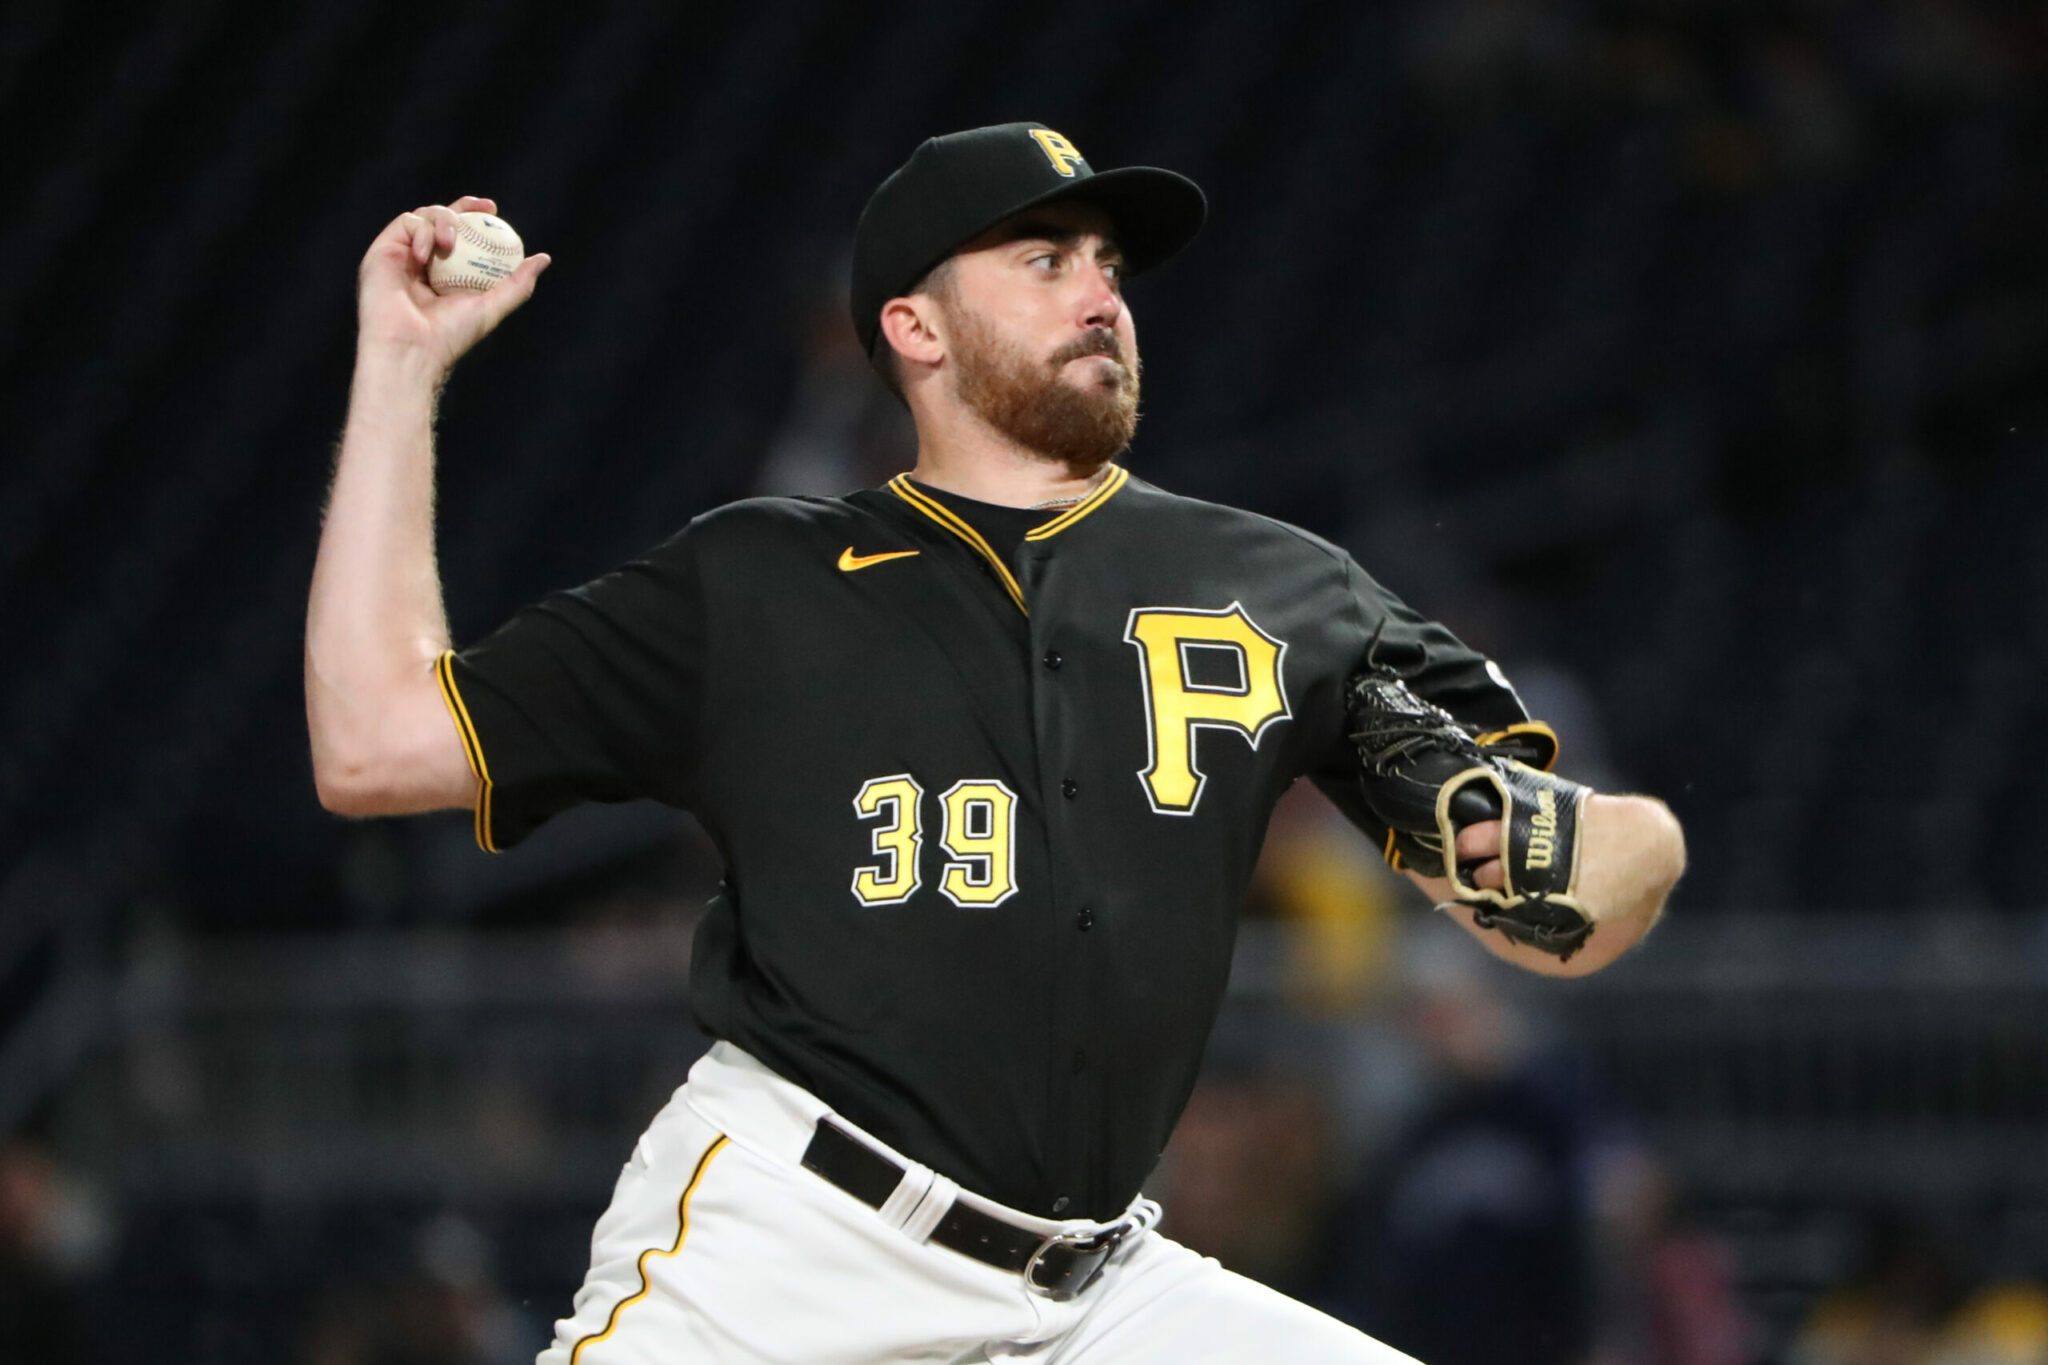 Williams: The Pirates Have Improved Their Depth at the Major League Level